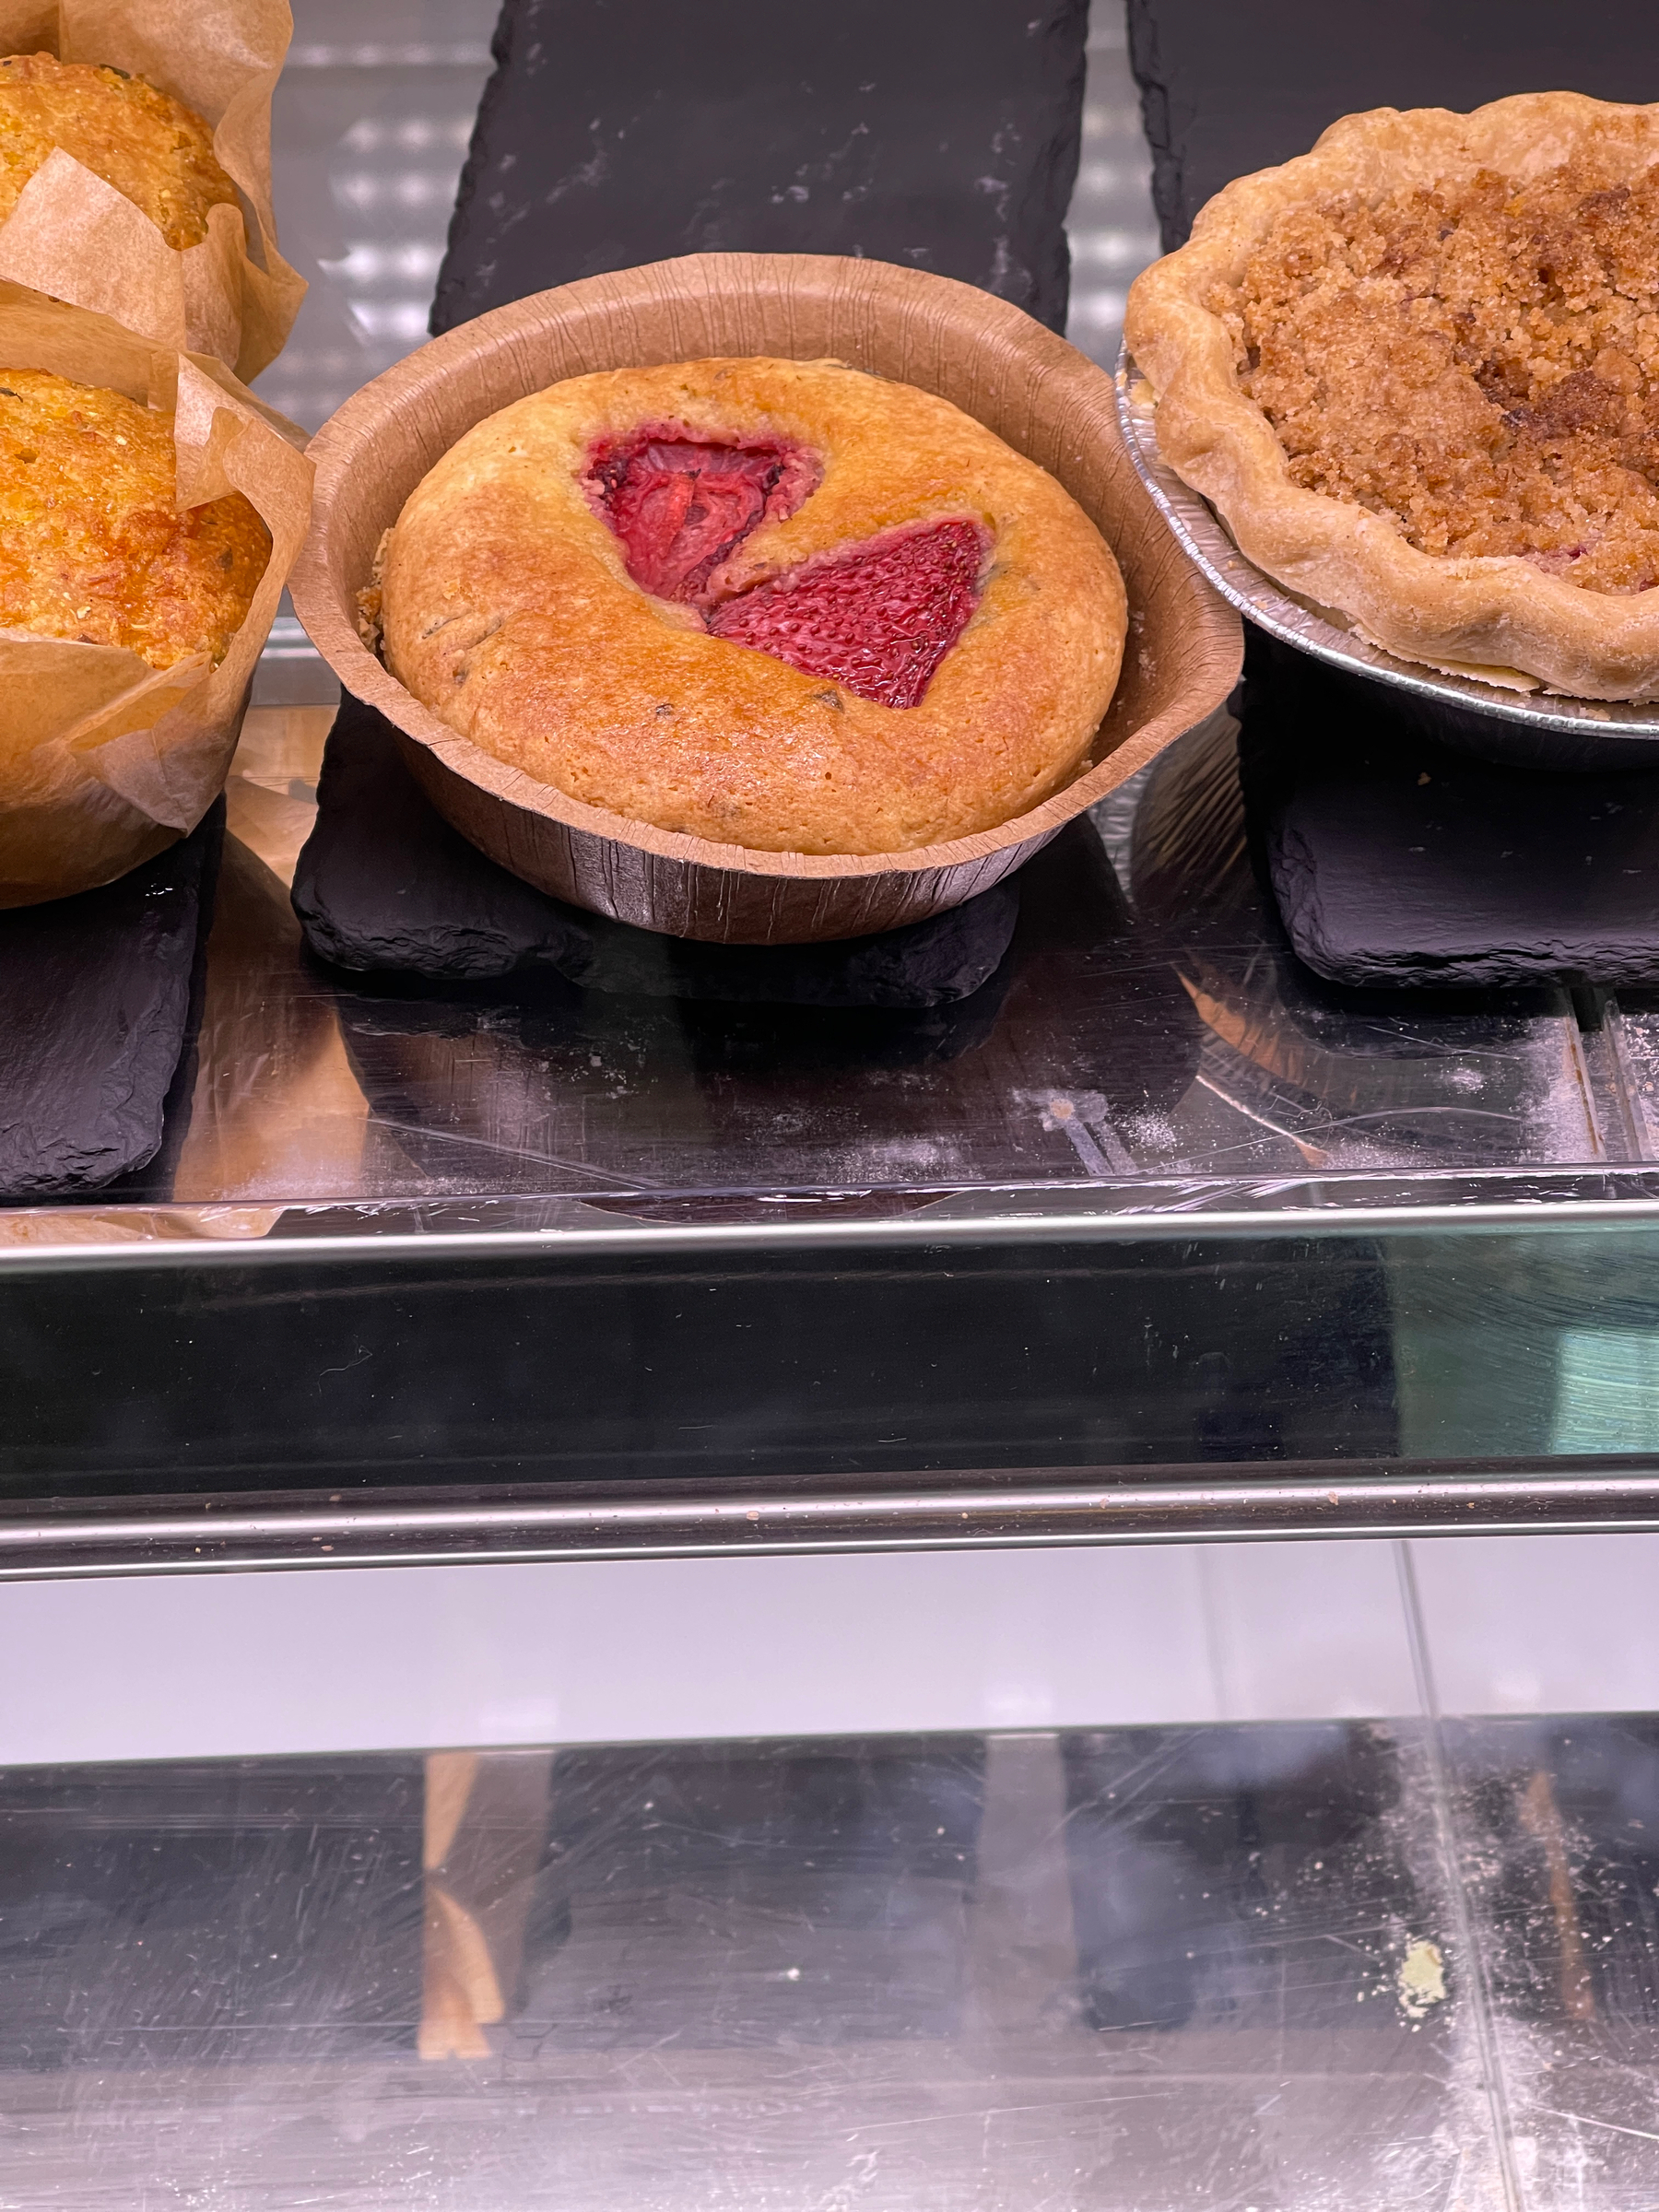 Strawberries imbedded in pastry on a display shelf.